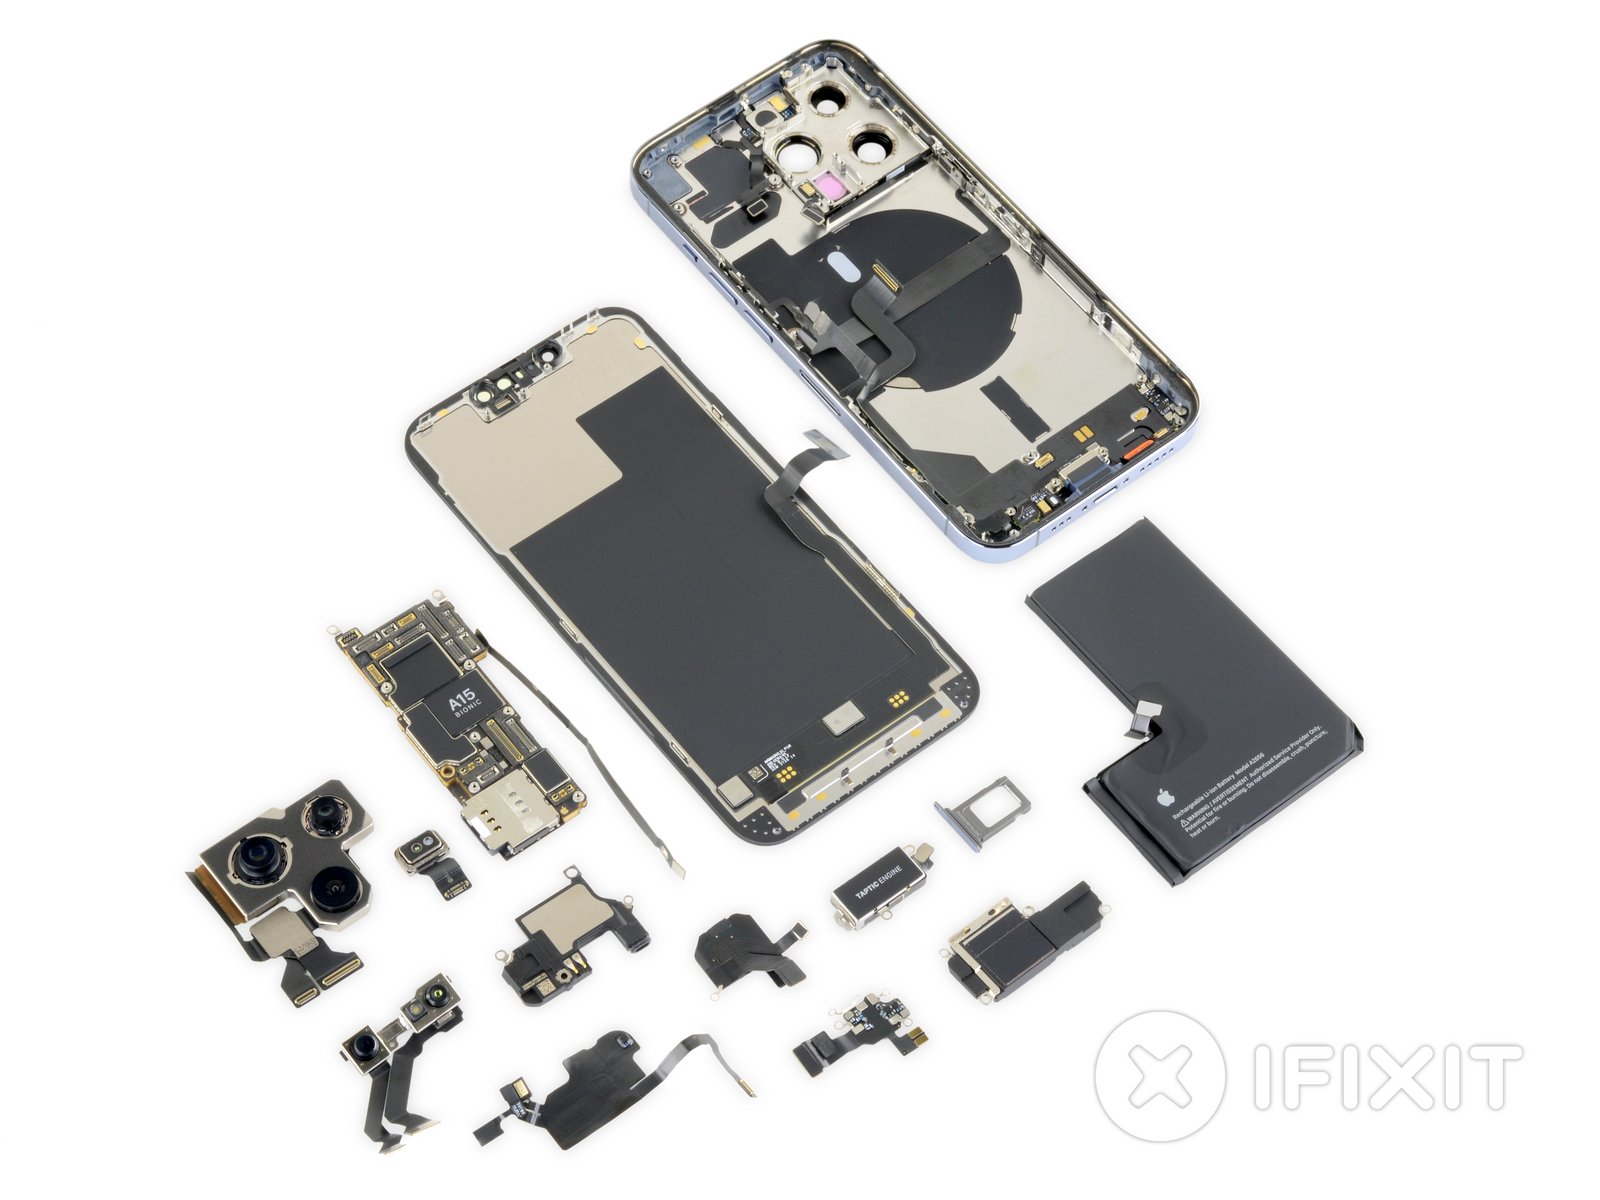 iPhone 13 Pro teardown by iFixit